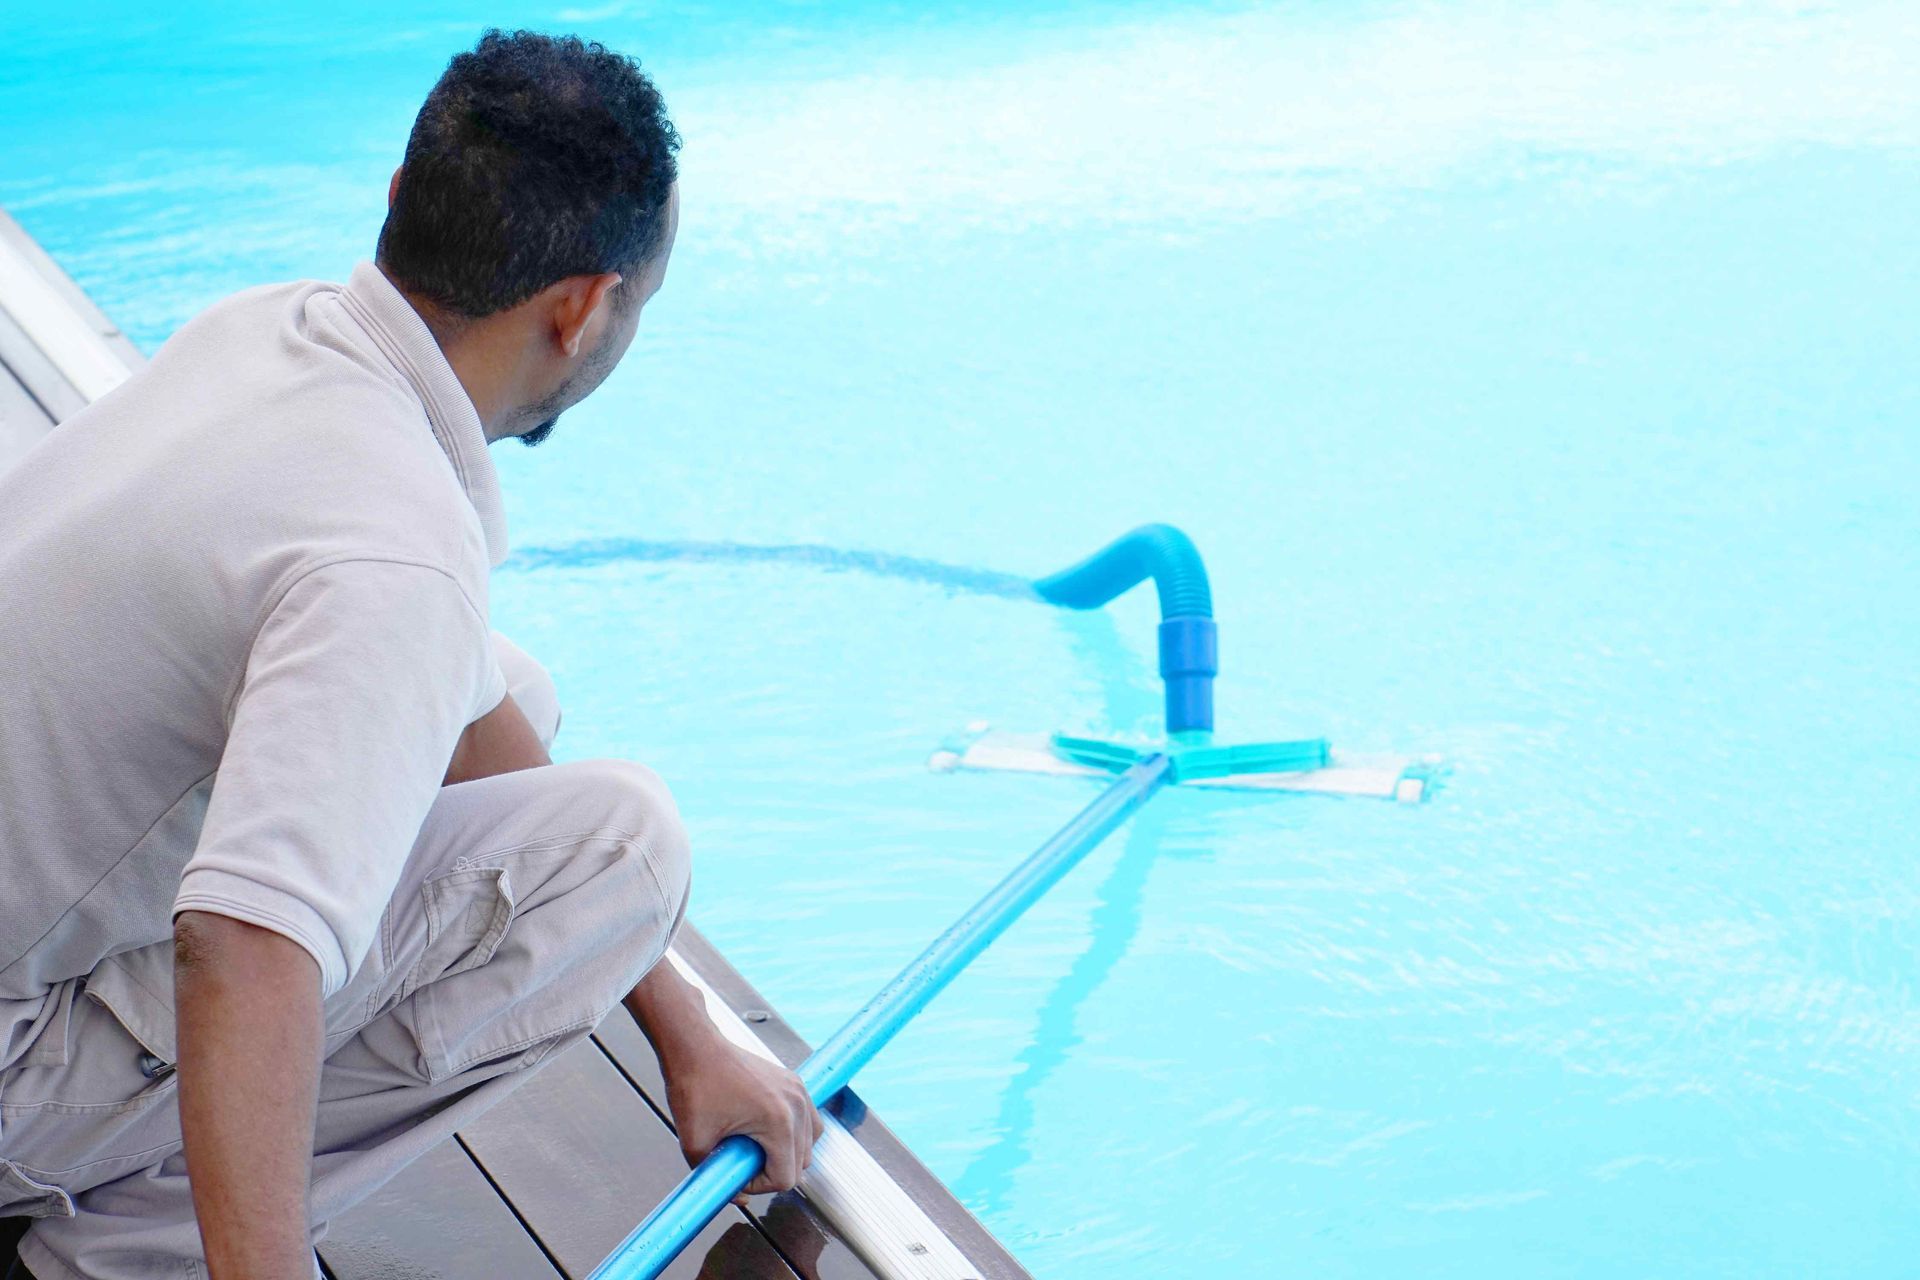 A worker is giving a pool cleaning service